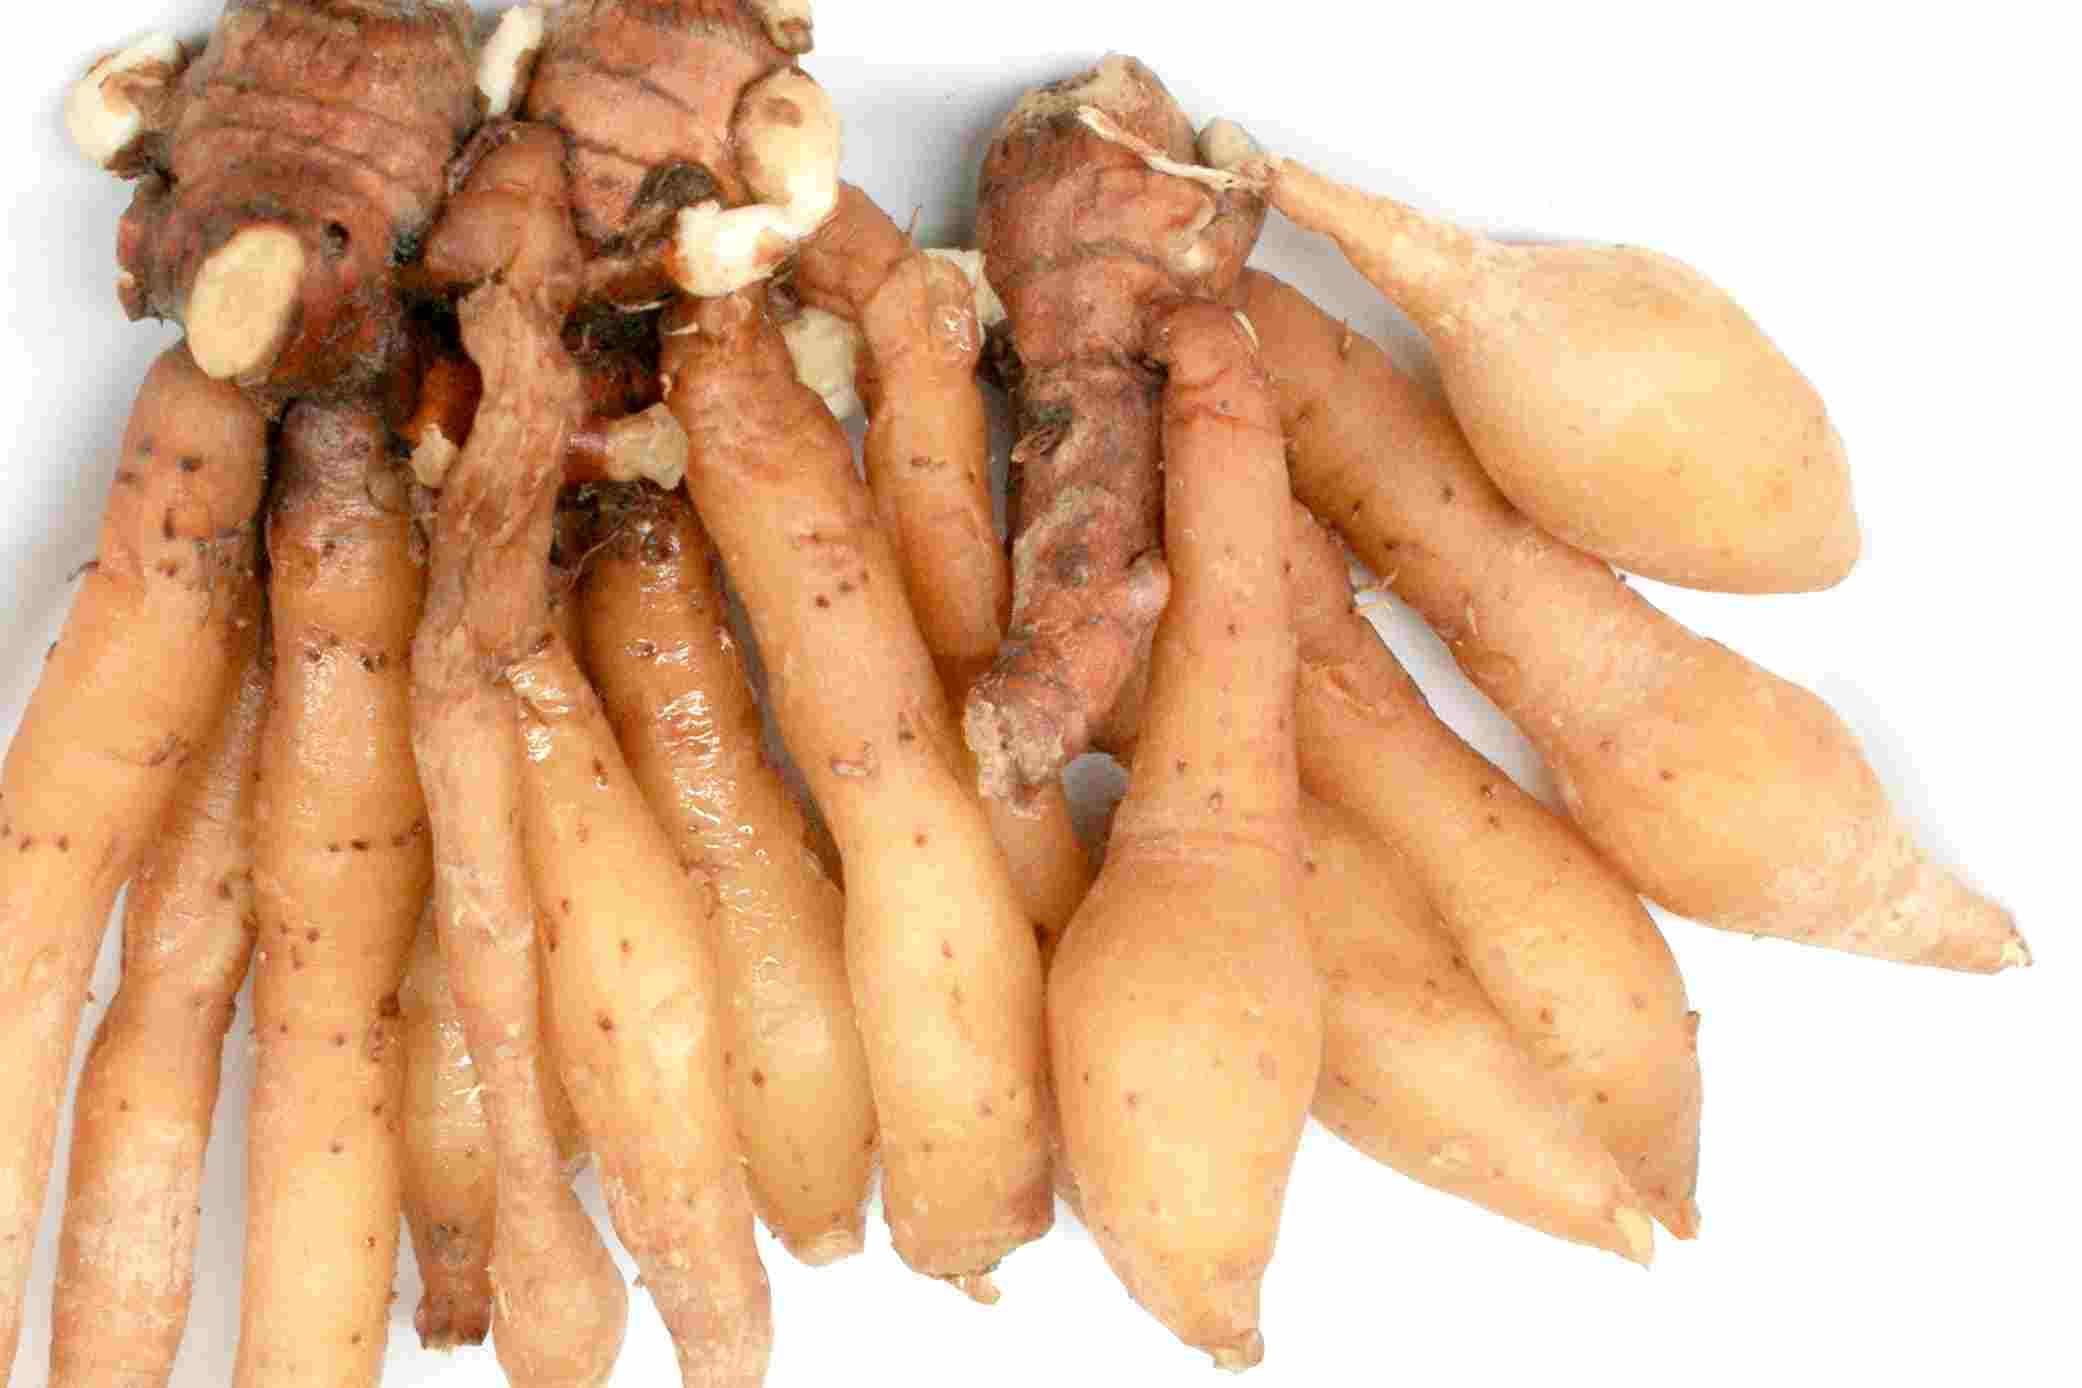 Description of: Chinese Ginger